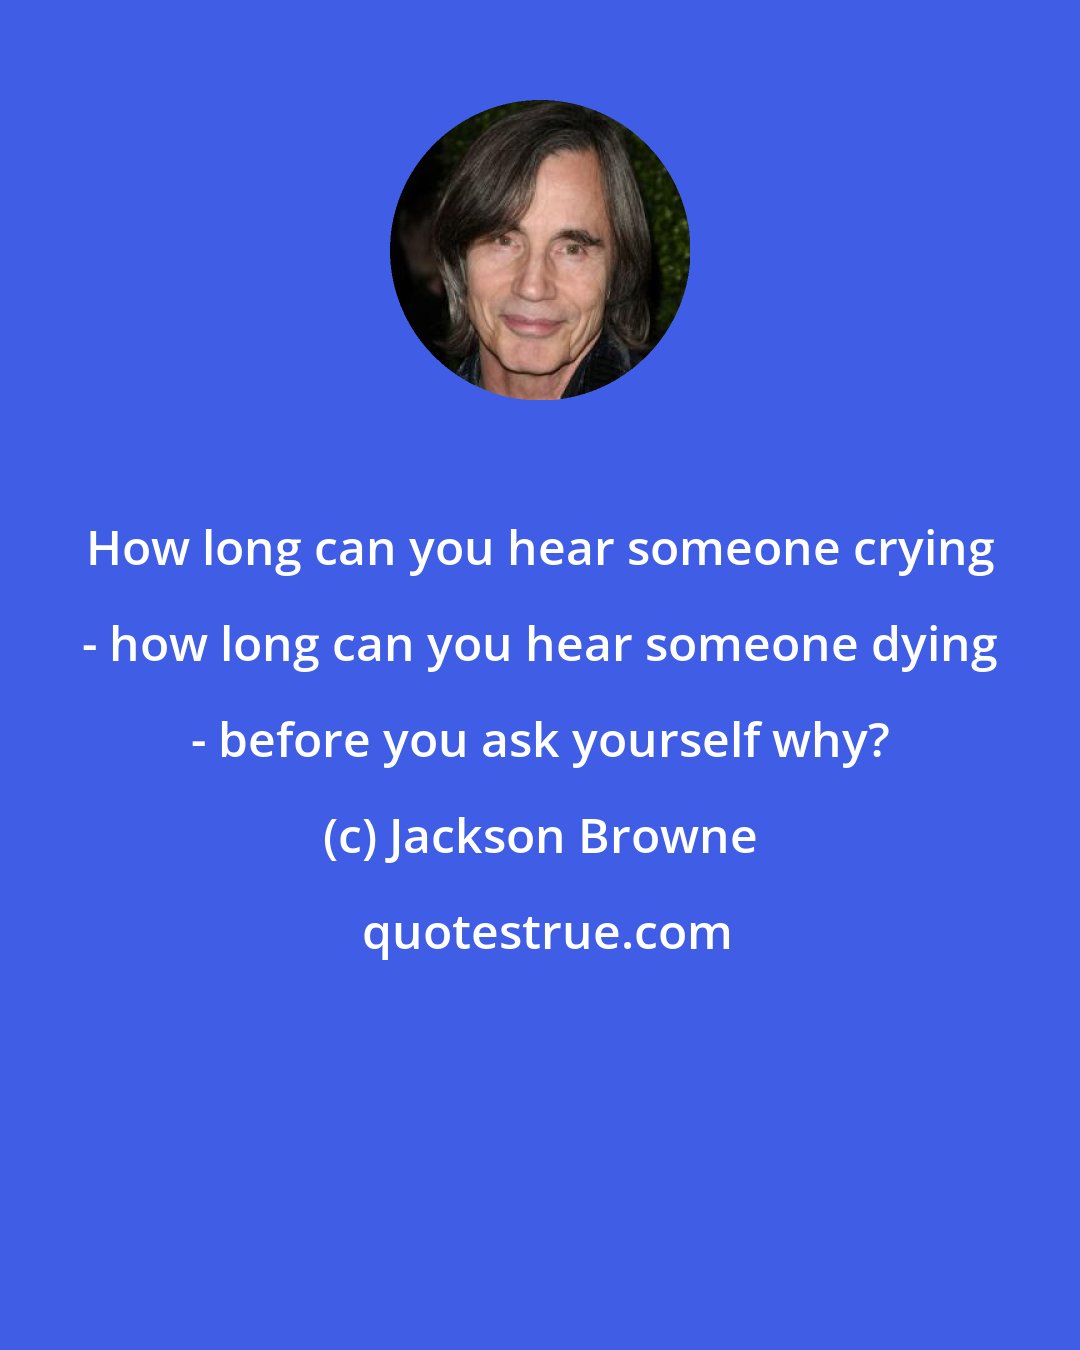 Jackson Browne: How long can you hear someone crying - how long can you hear someone dying - before you ask yourself why?